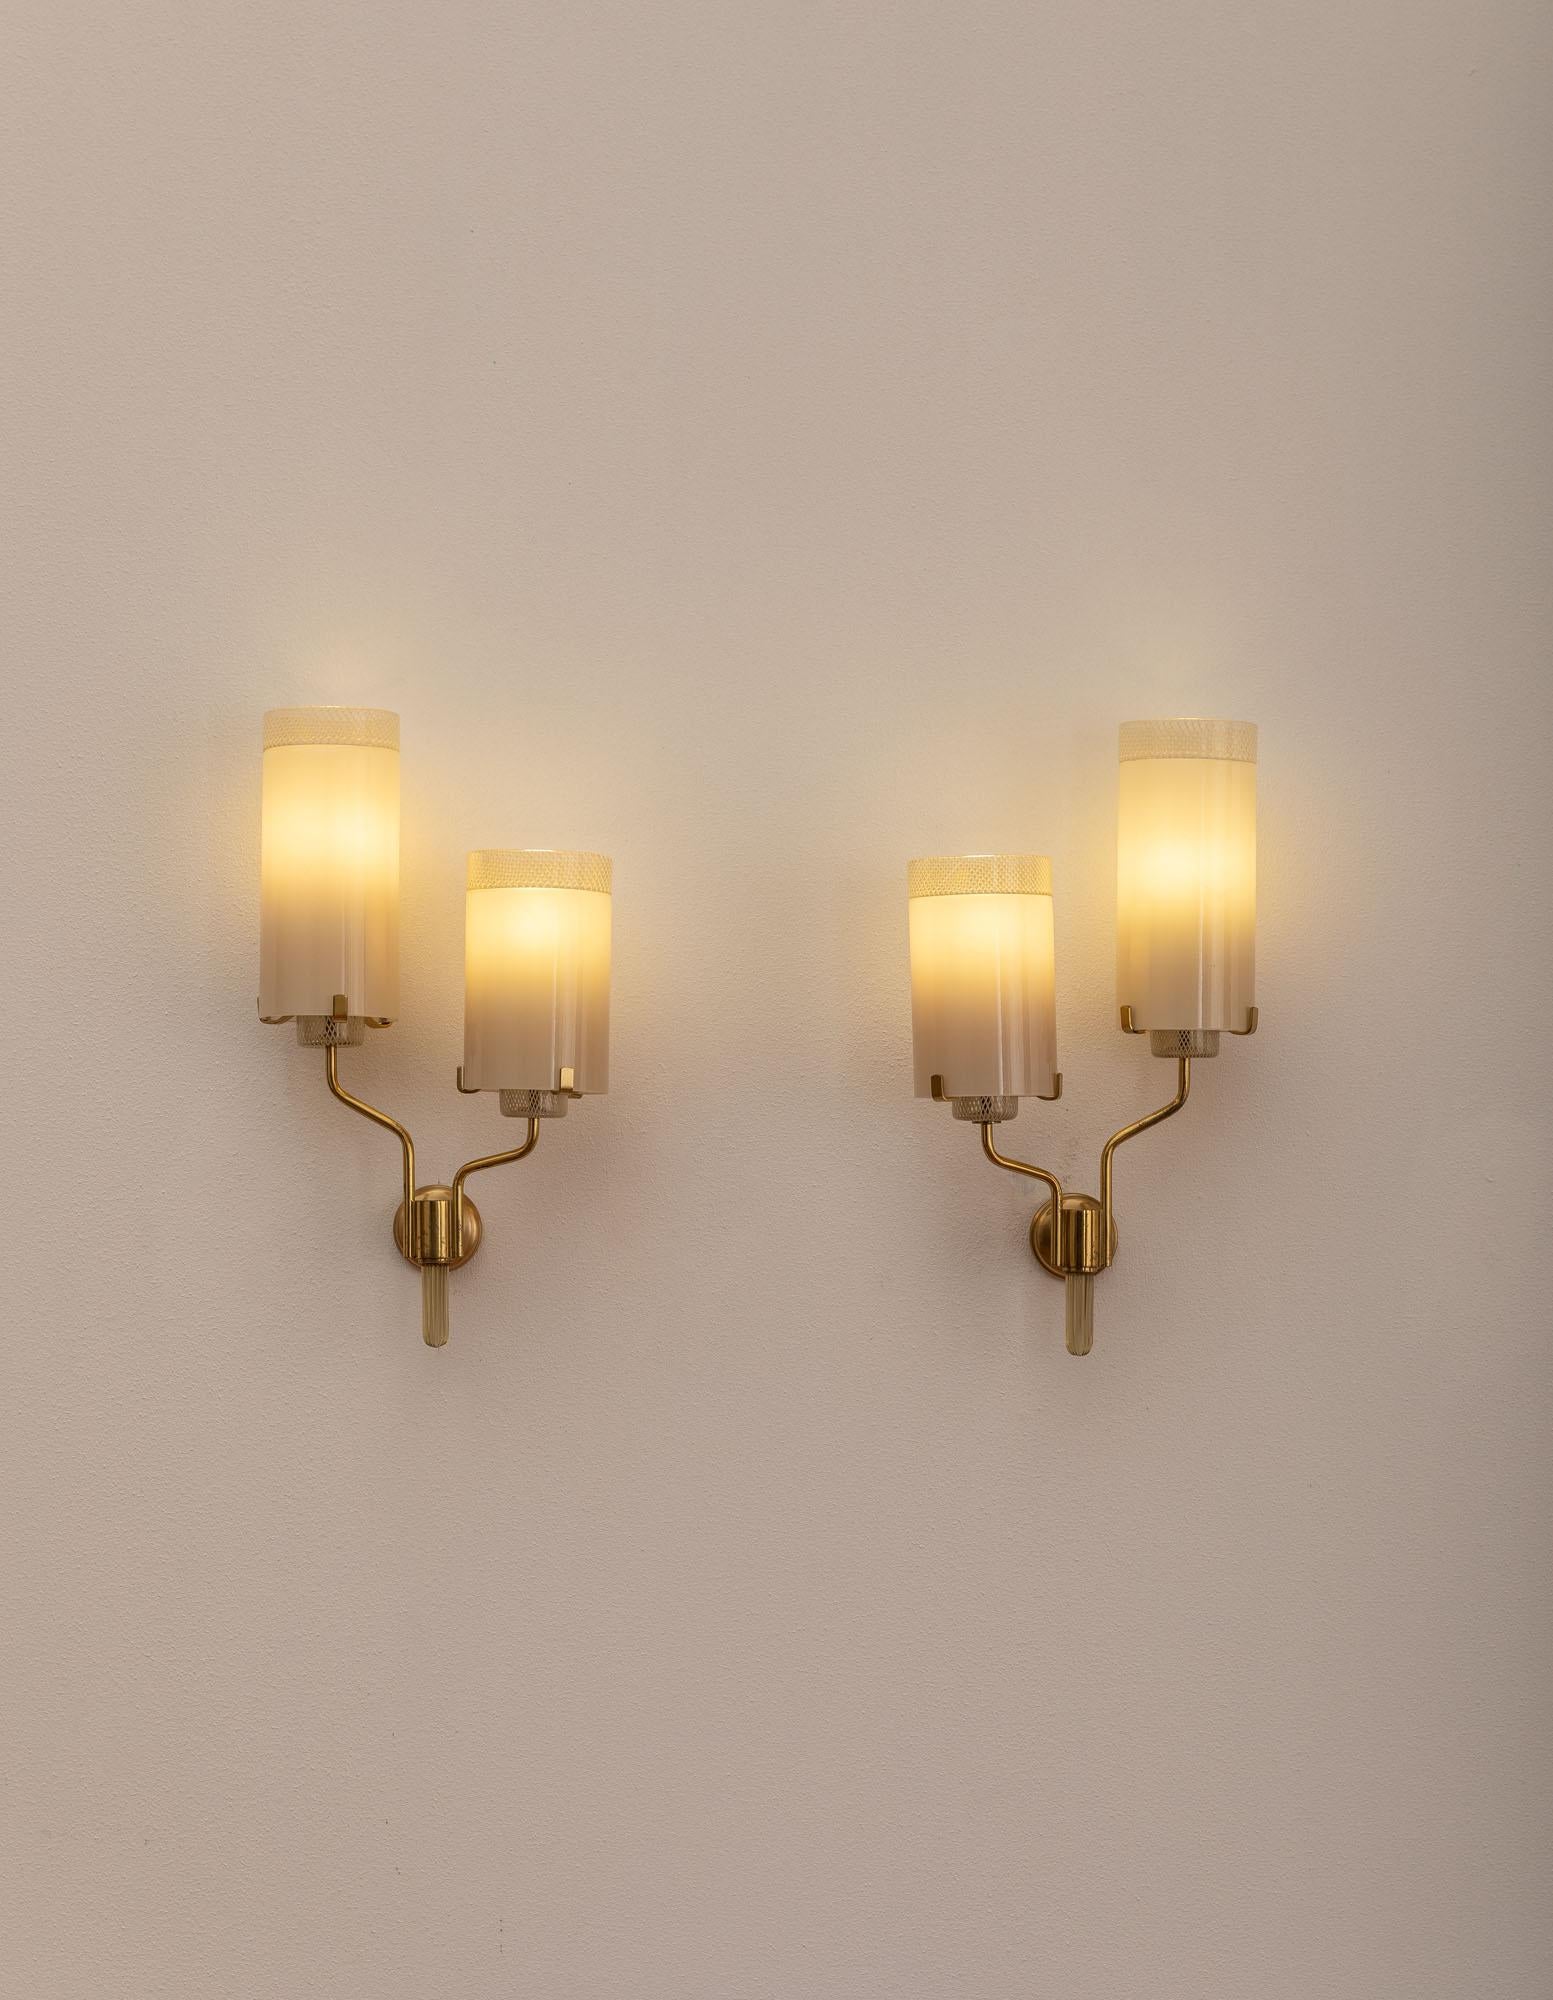 Pair of elegant sconces with refined brass details.
Each applique has two lights, composed by cylindrical Murano glass shades decorated with Reticello, a geometrical motif as the internal light holders. The thin brass arms have different lengths as